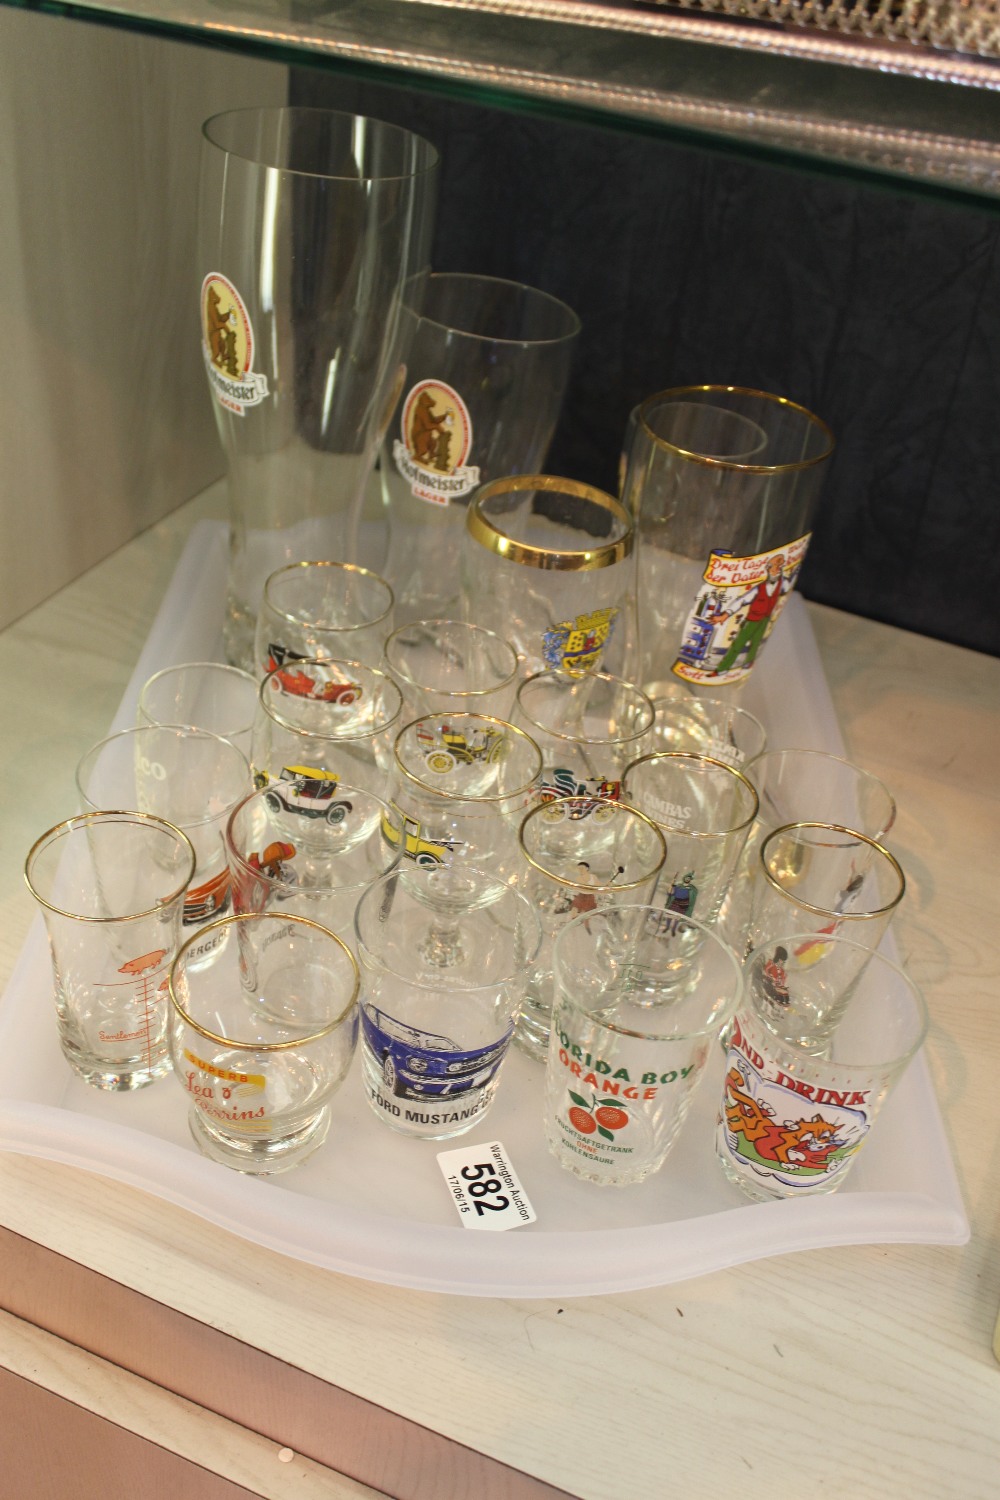 Tray of vintage glasses including graduated boot glasses